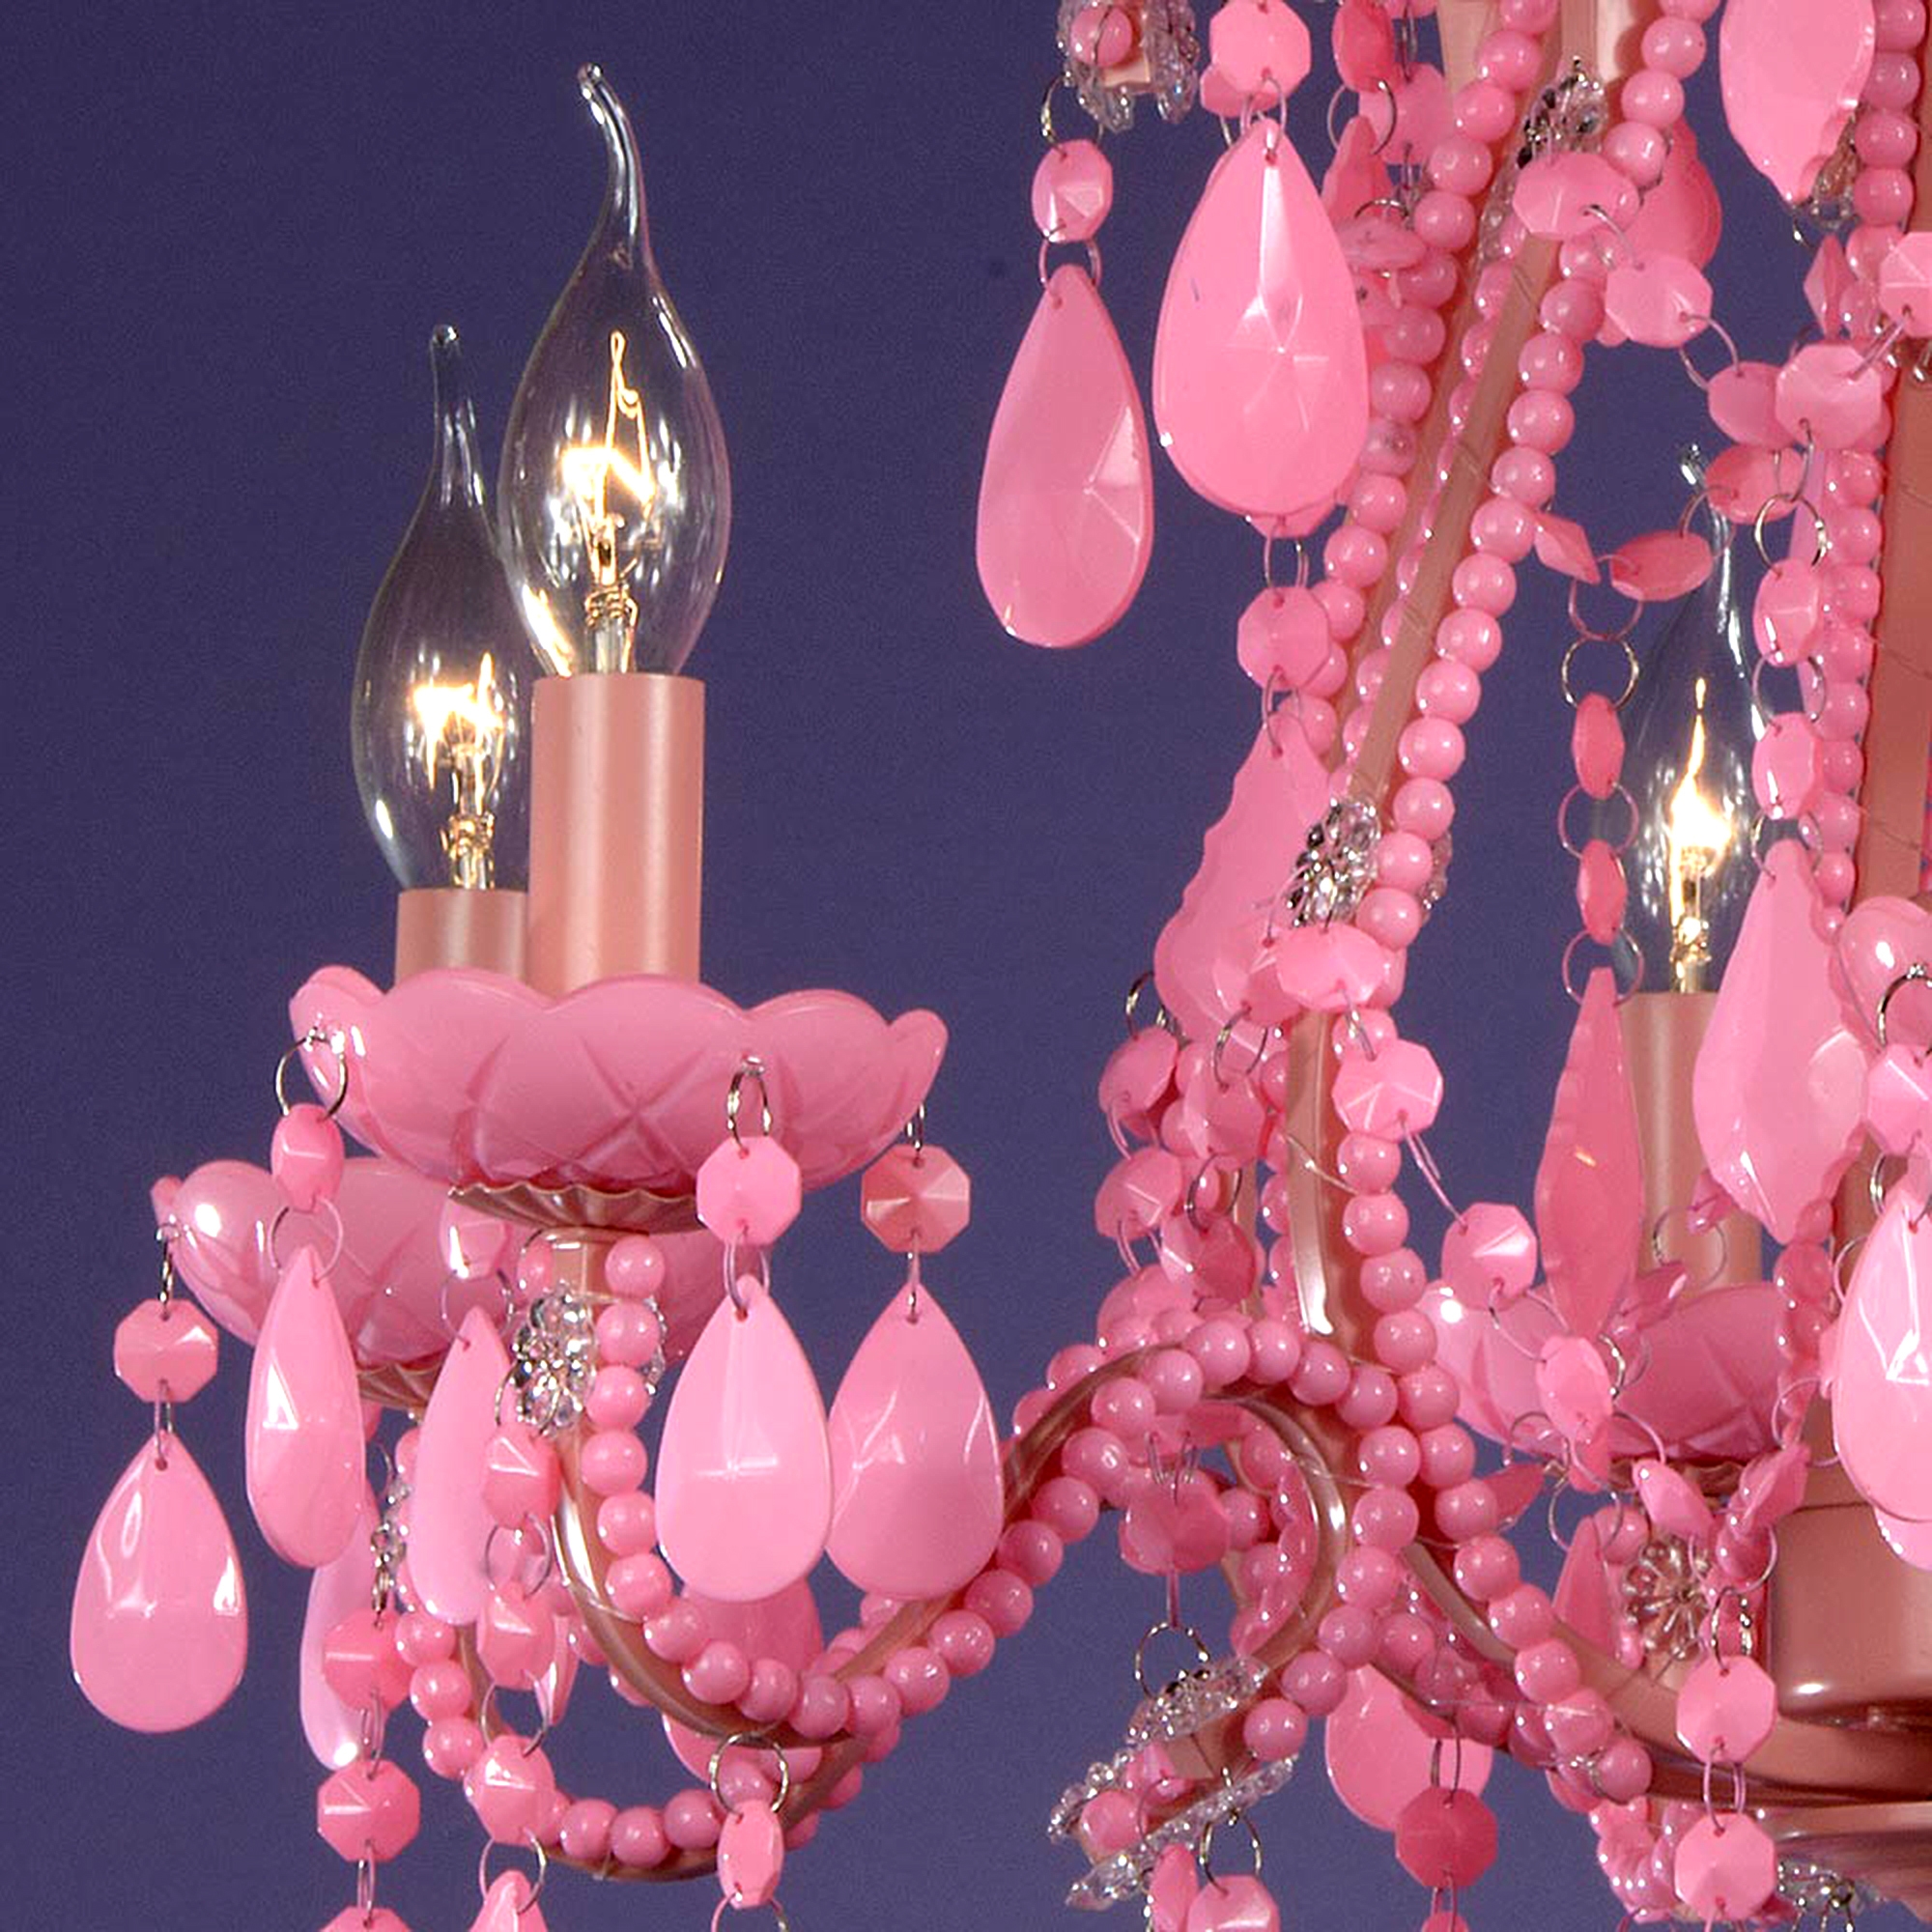 Marie Therese 6 Light Chandelier - Pink